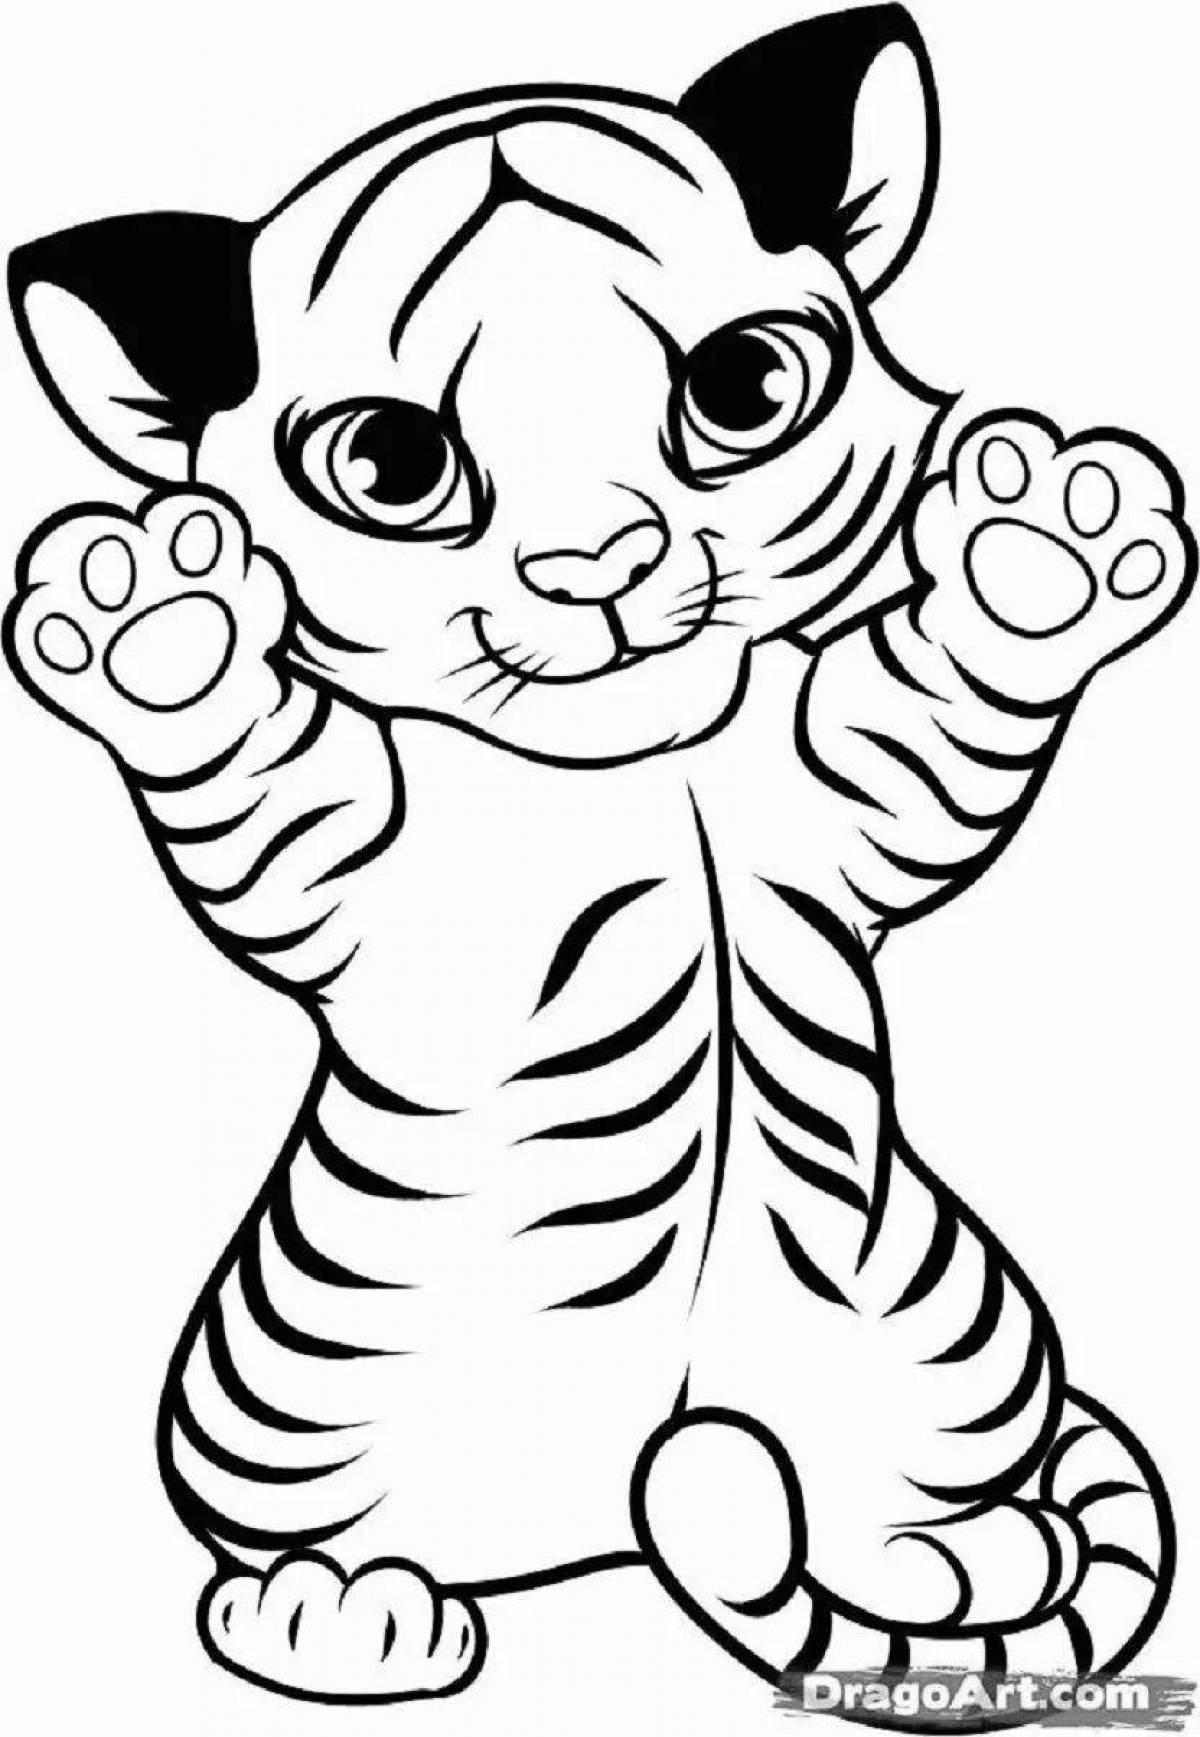 A striking tiger coloring pages for kids